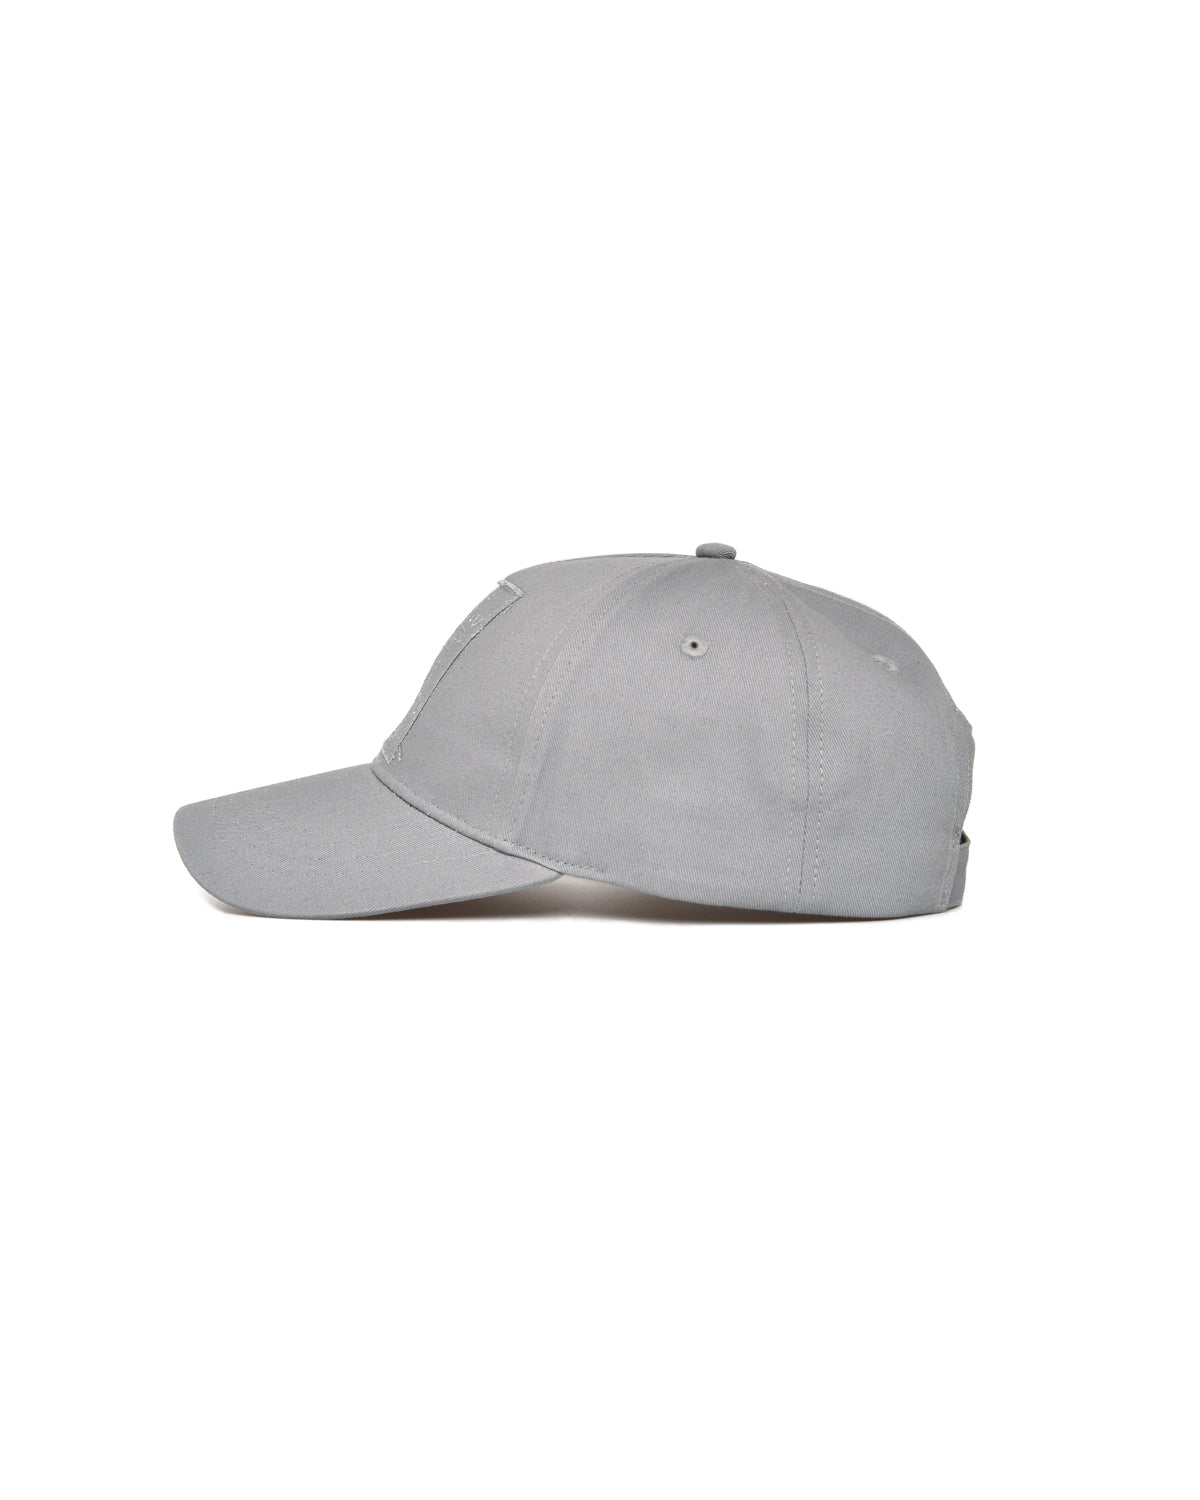 Anthracite-Coloured 100% Cotton Baseball Cap With Embroidered Vanlife Label